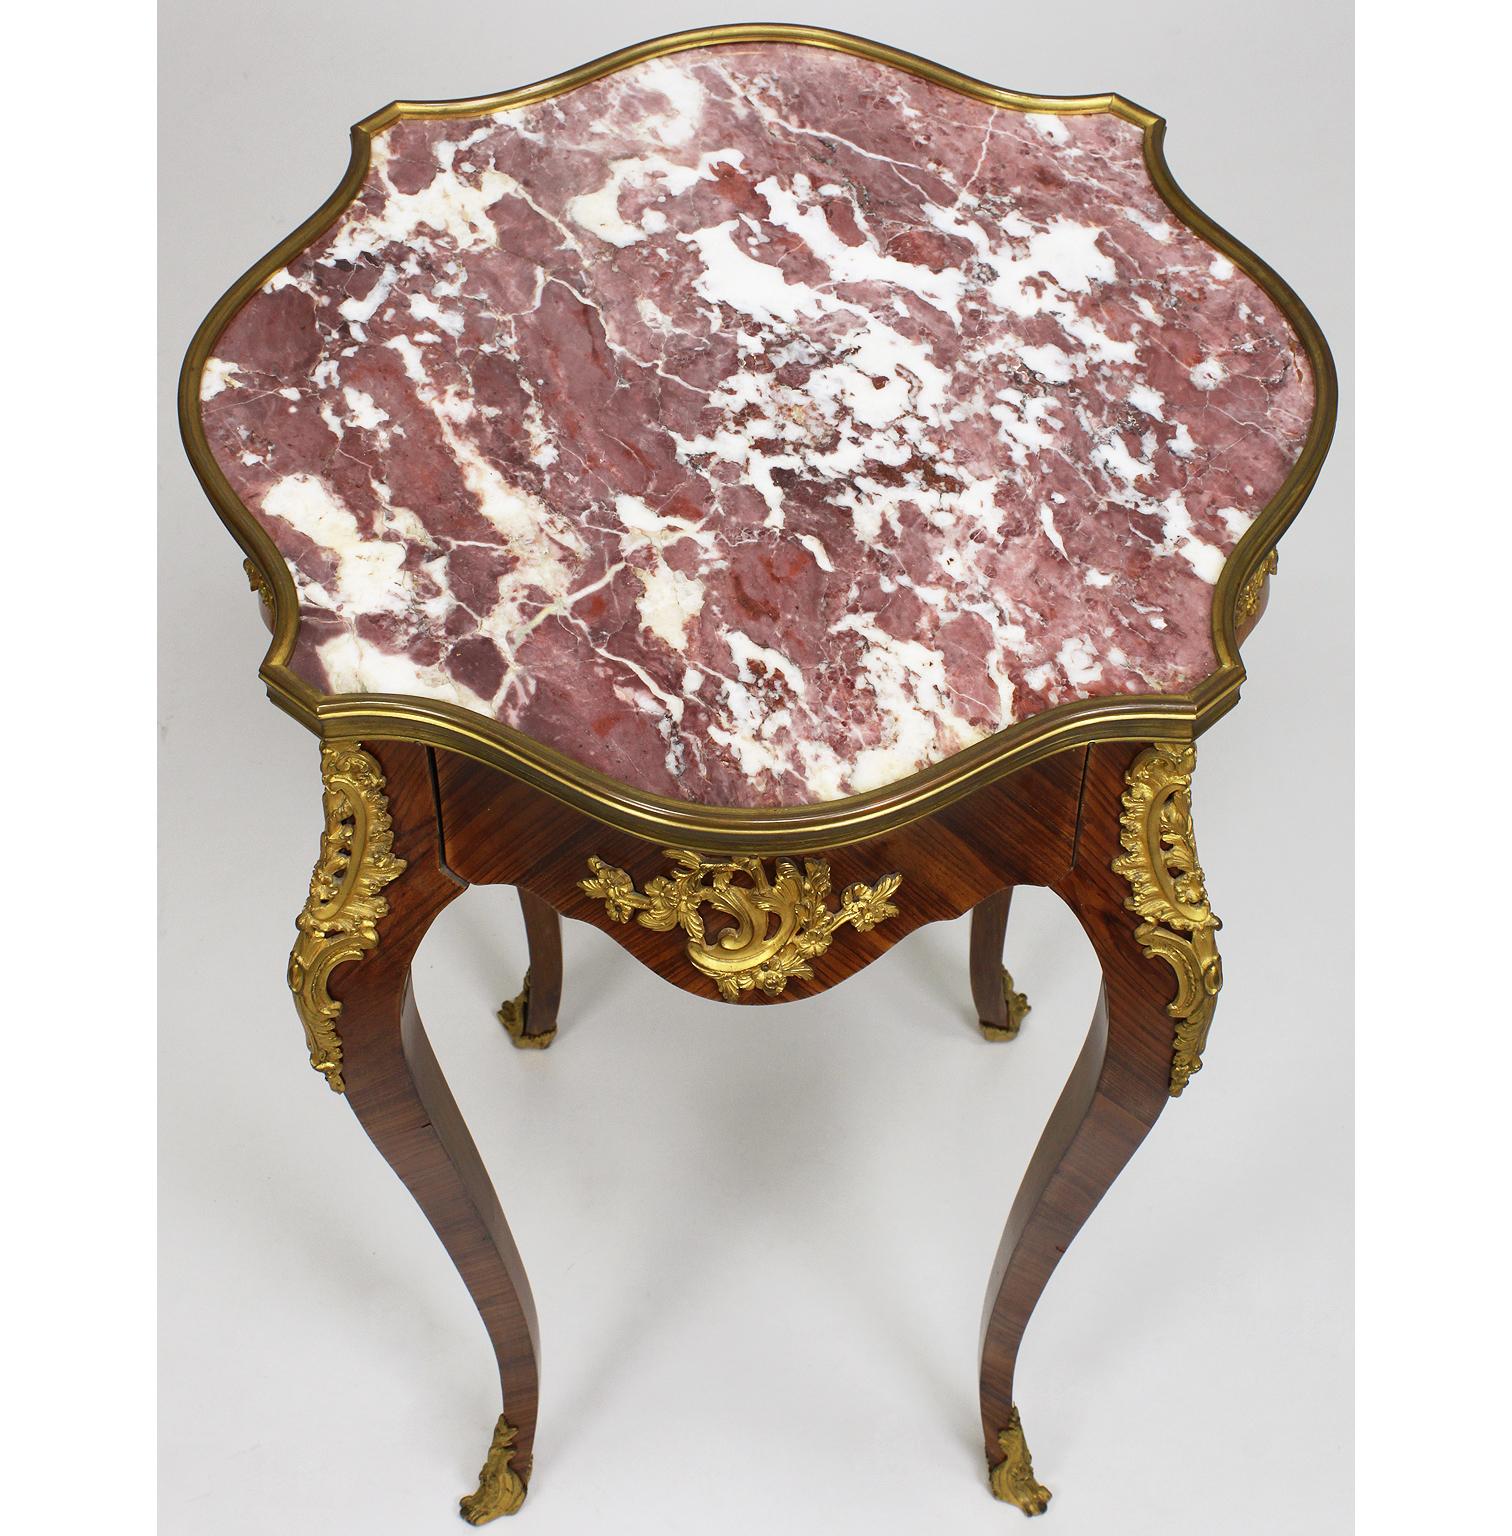 Early 20th Century French 19th Century Louis XV Style Kingwood & Ormolu Mounted Side Table Gueridon For Sale